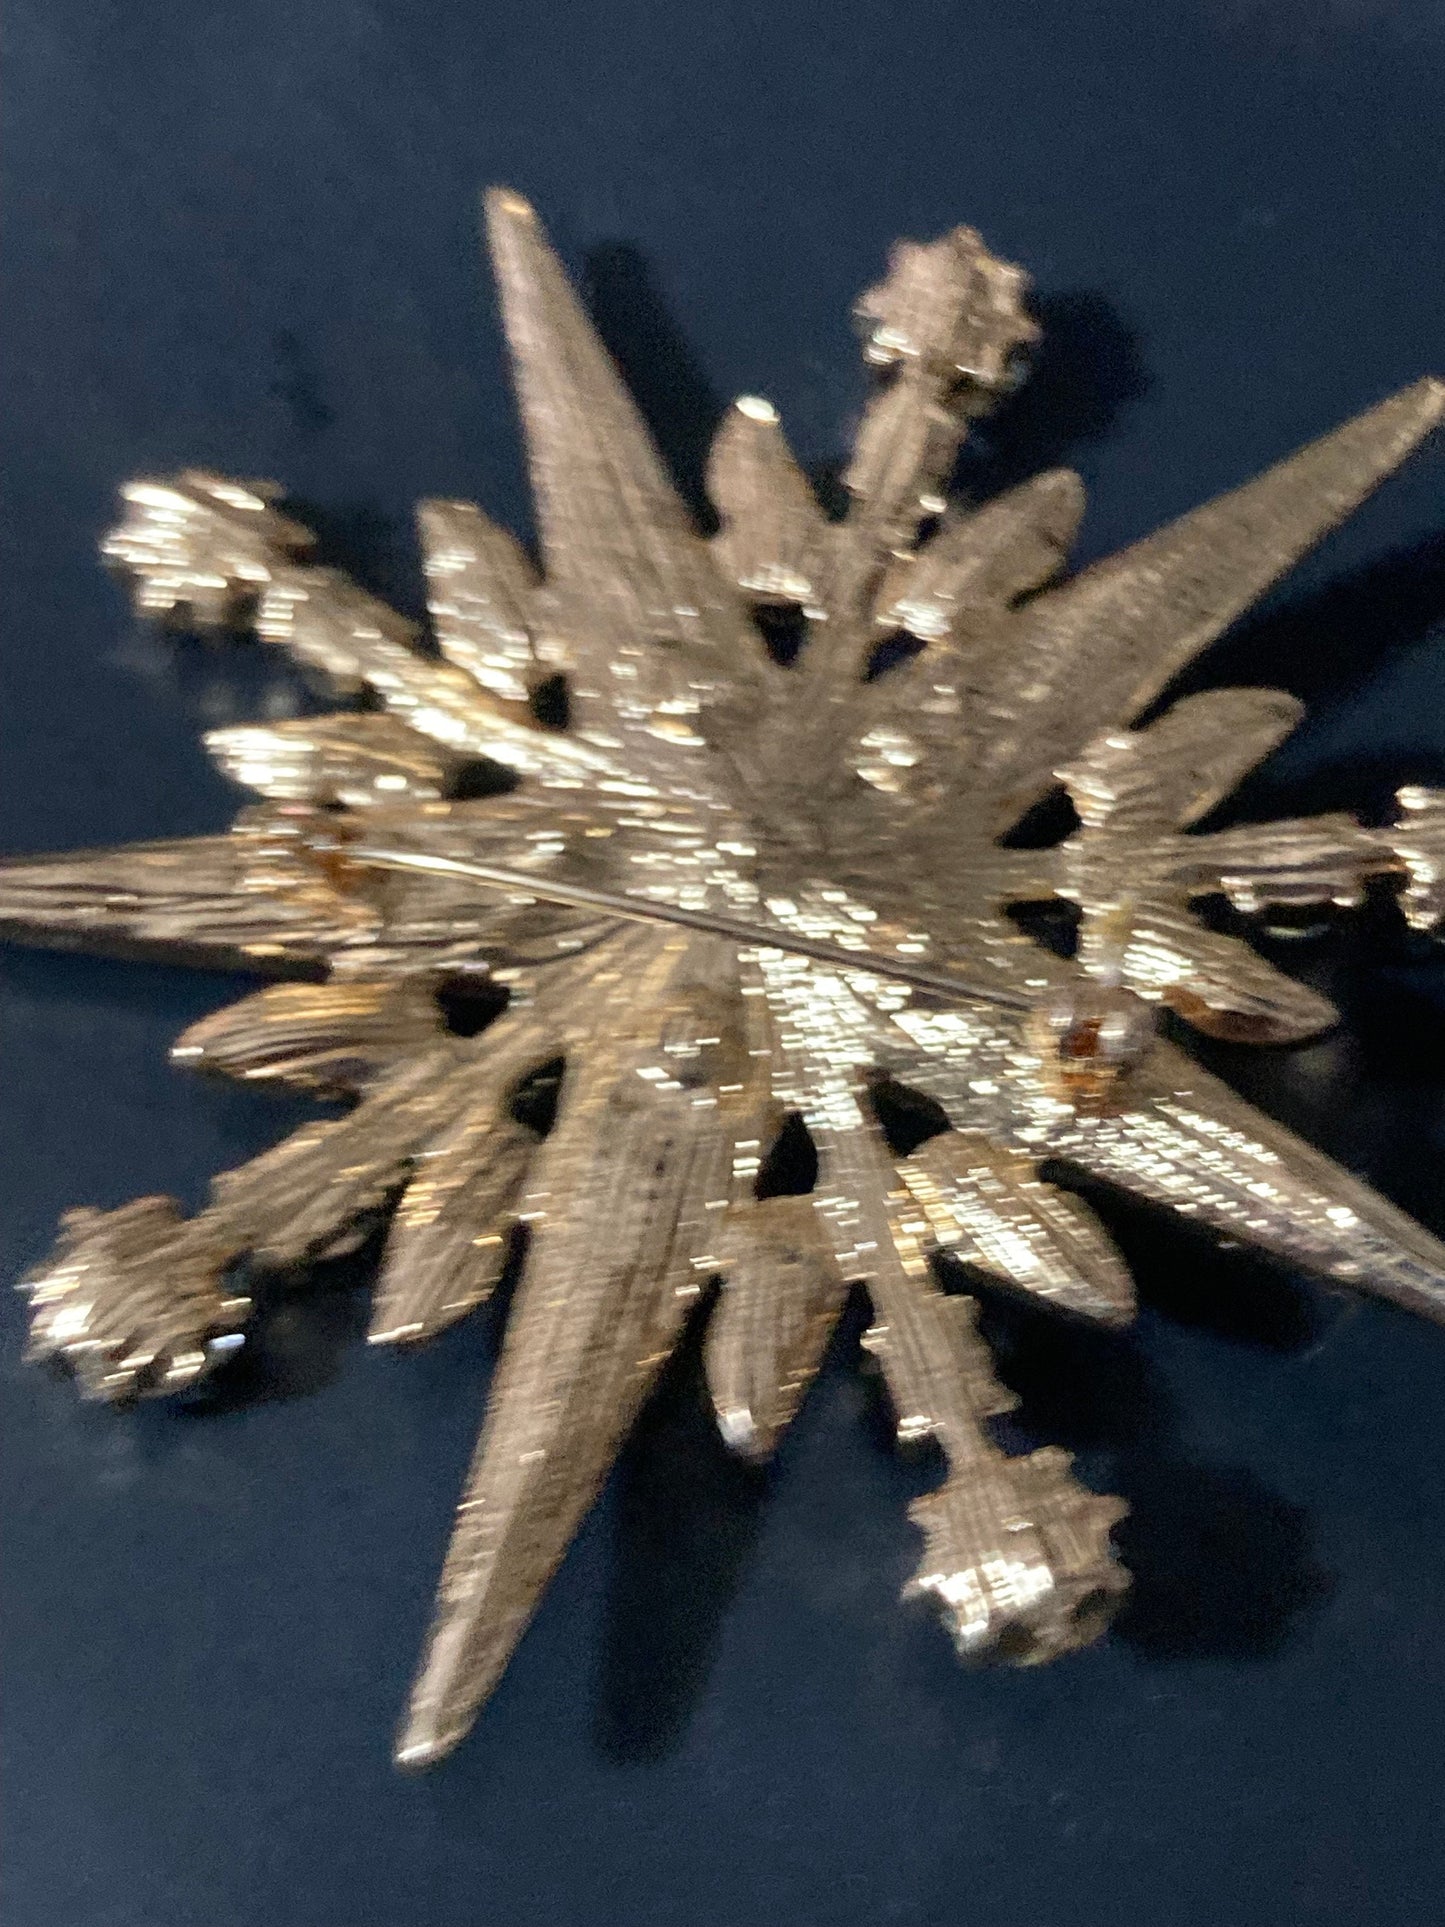 Large clear Crystal diamanté star brooch Victorian Style retro gold tone